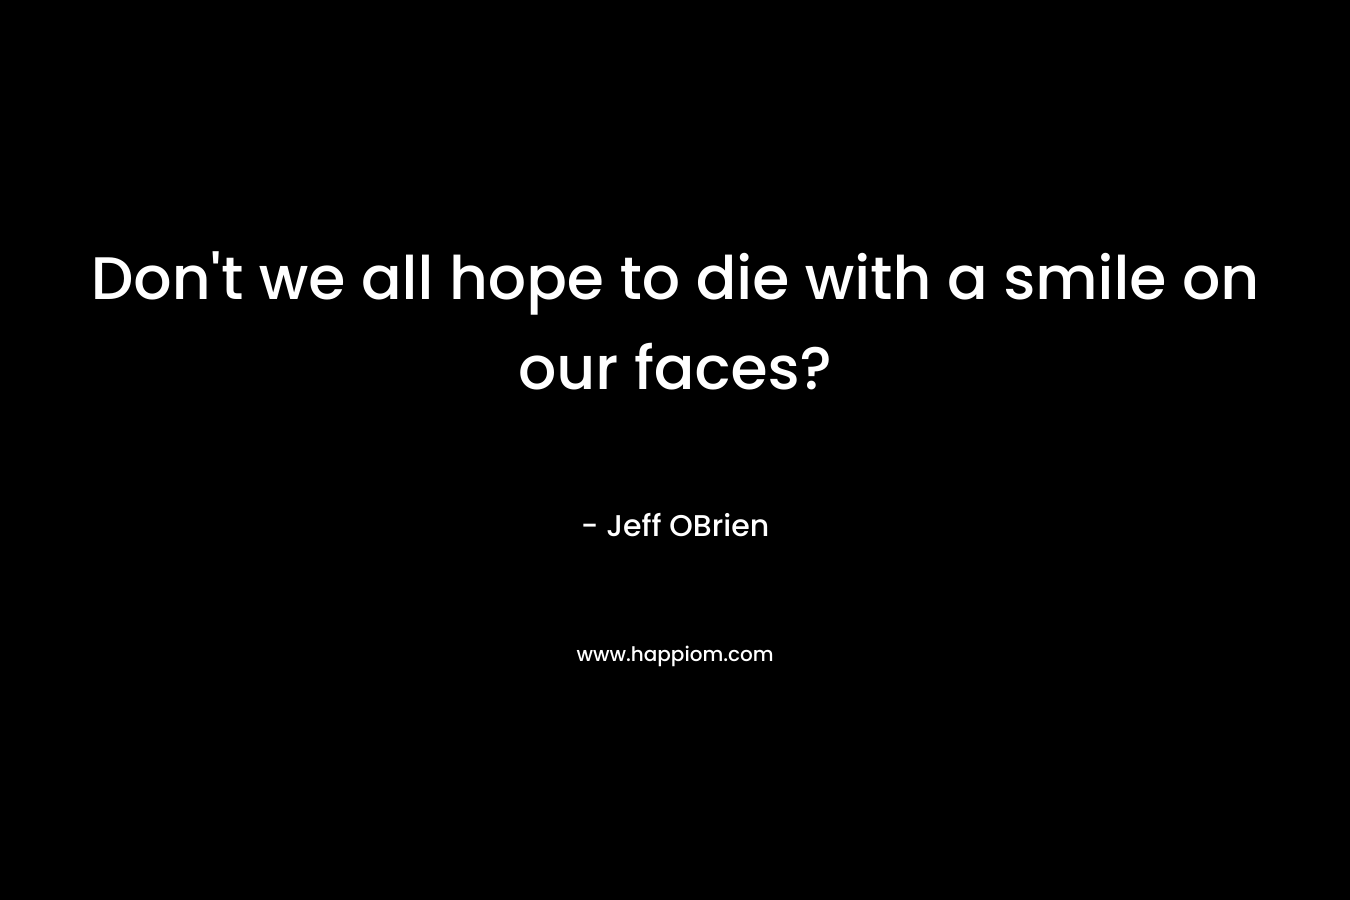 Don’t we all hope to die with a smile on our faces? – Jeff OBrien